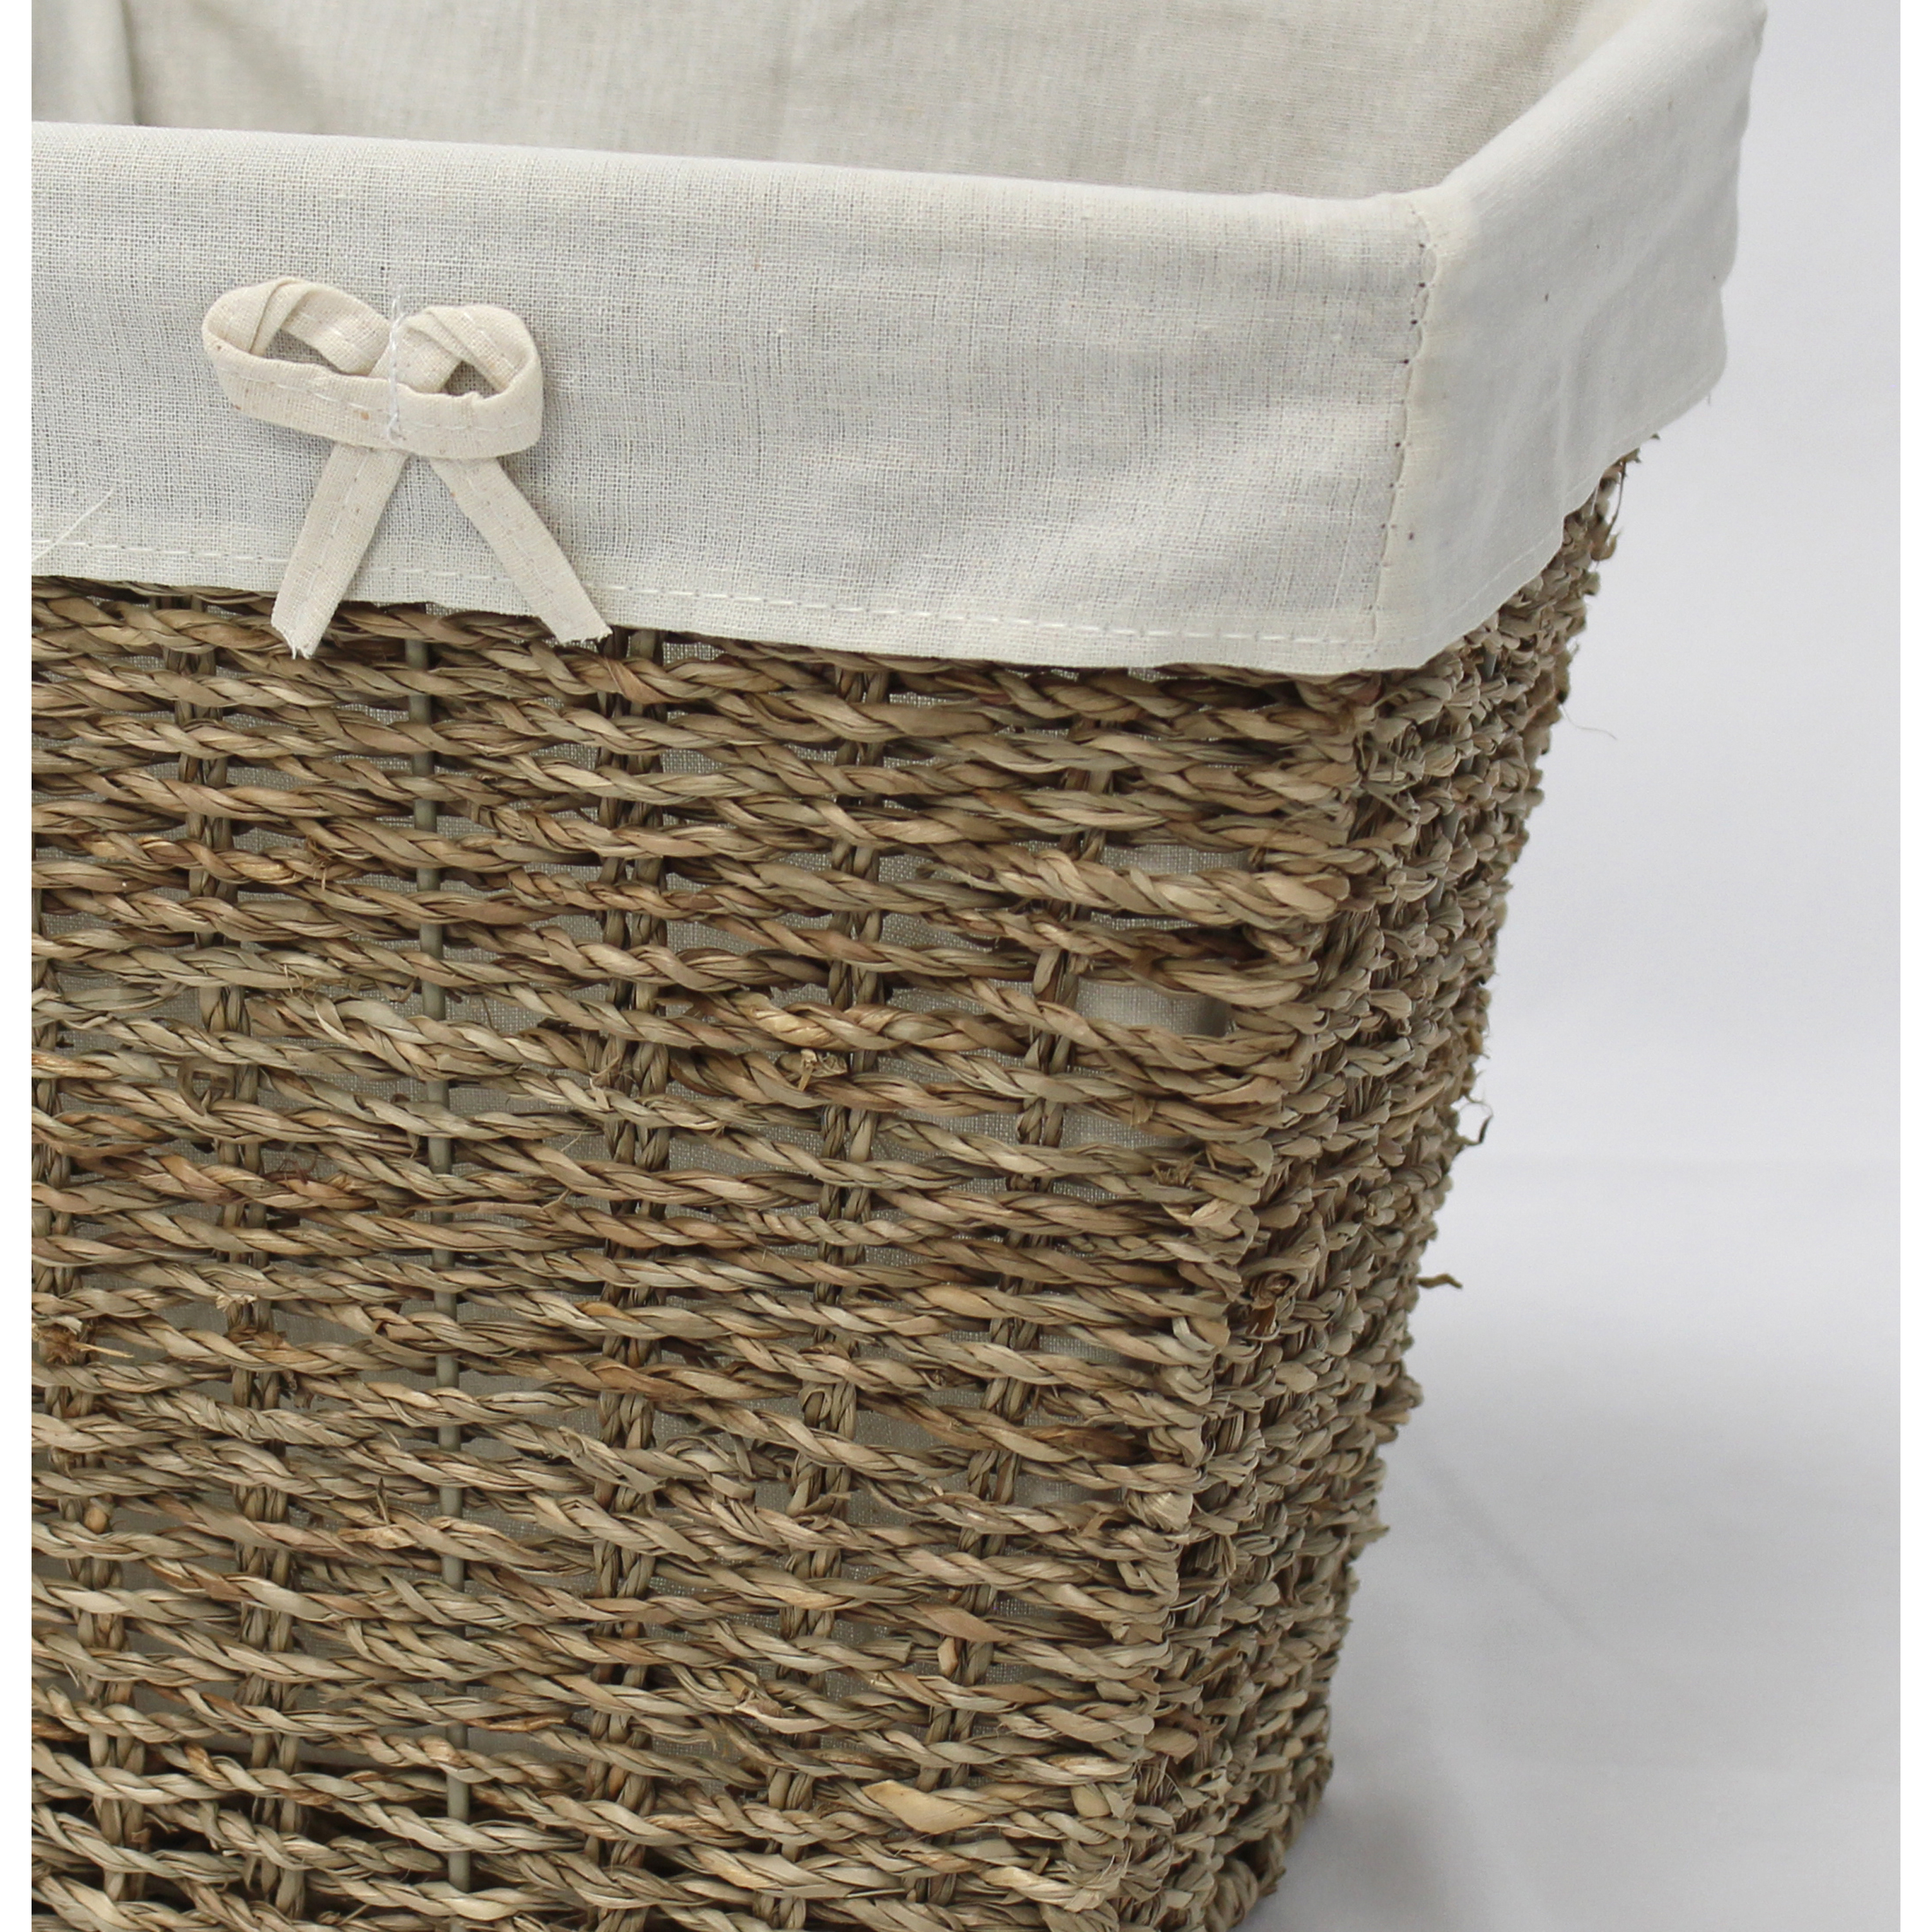 Woven Seagrass Small Waste Bin Lined With White Washable Lining